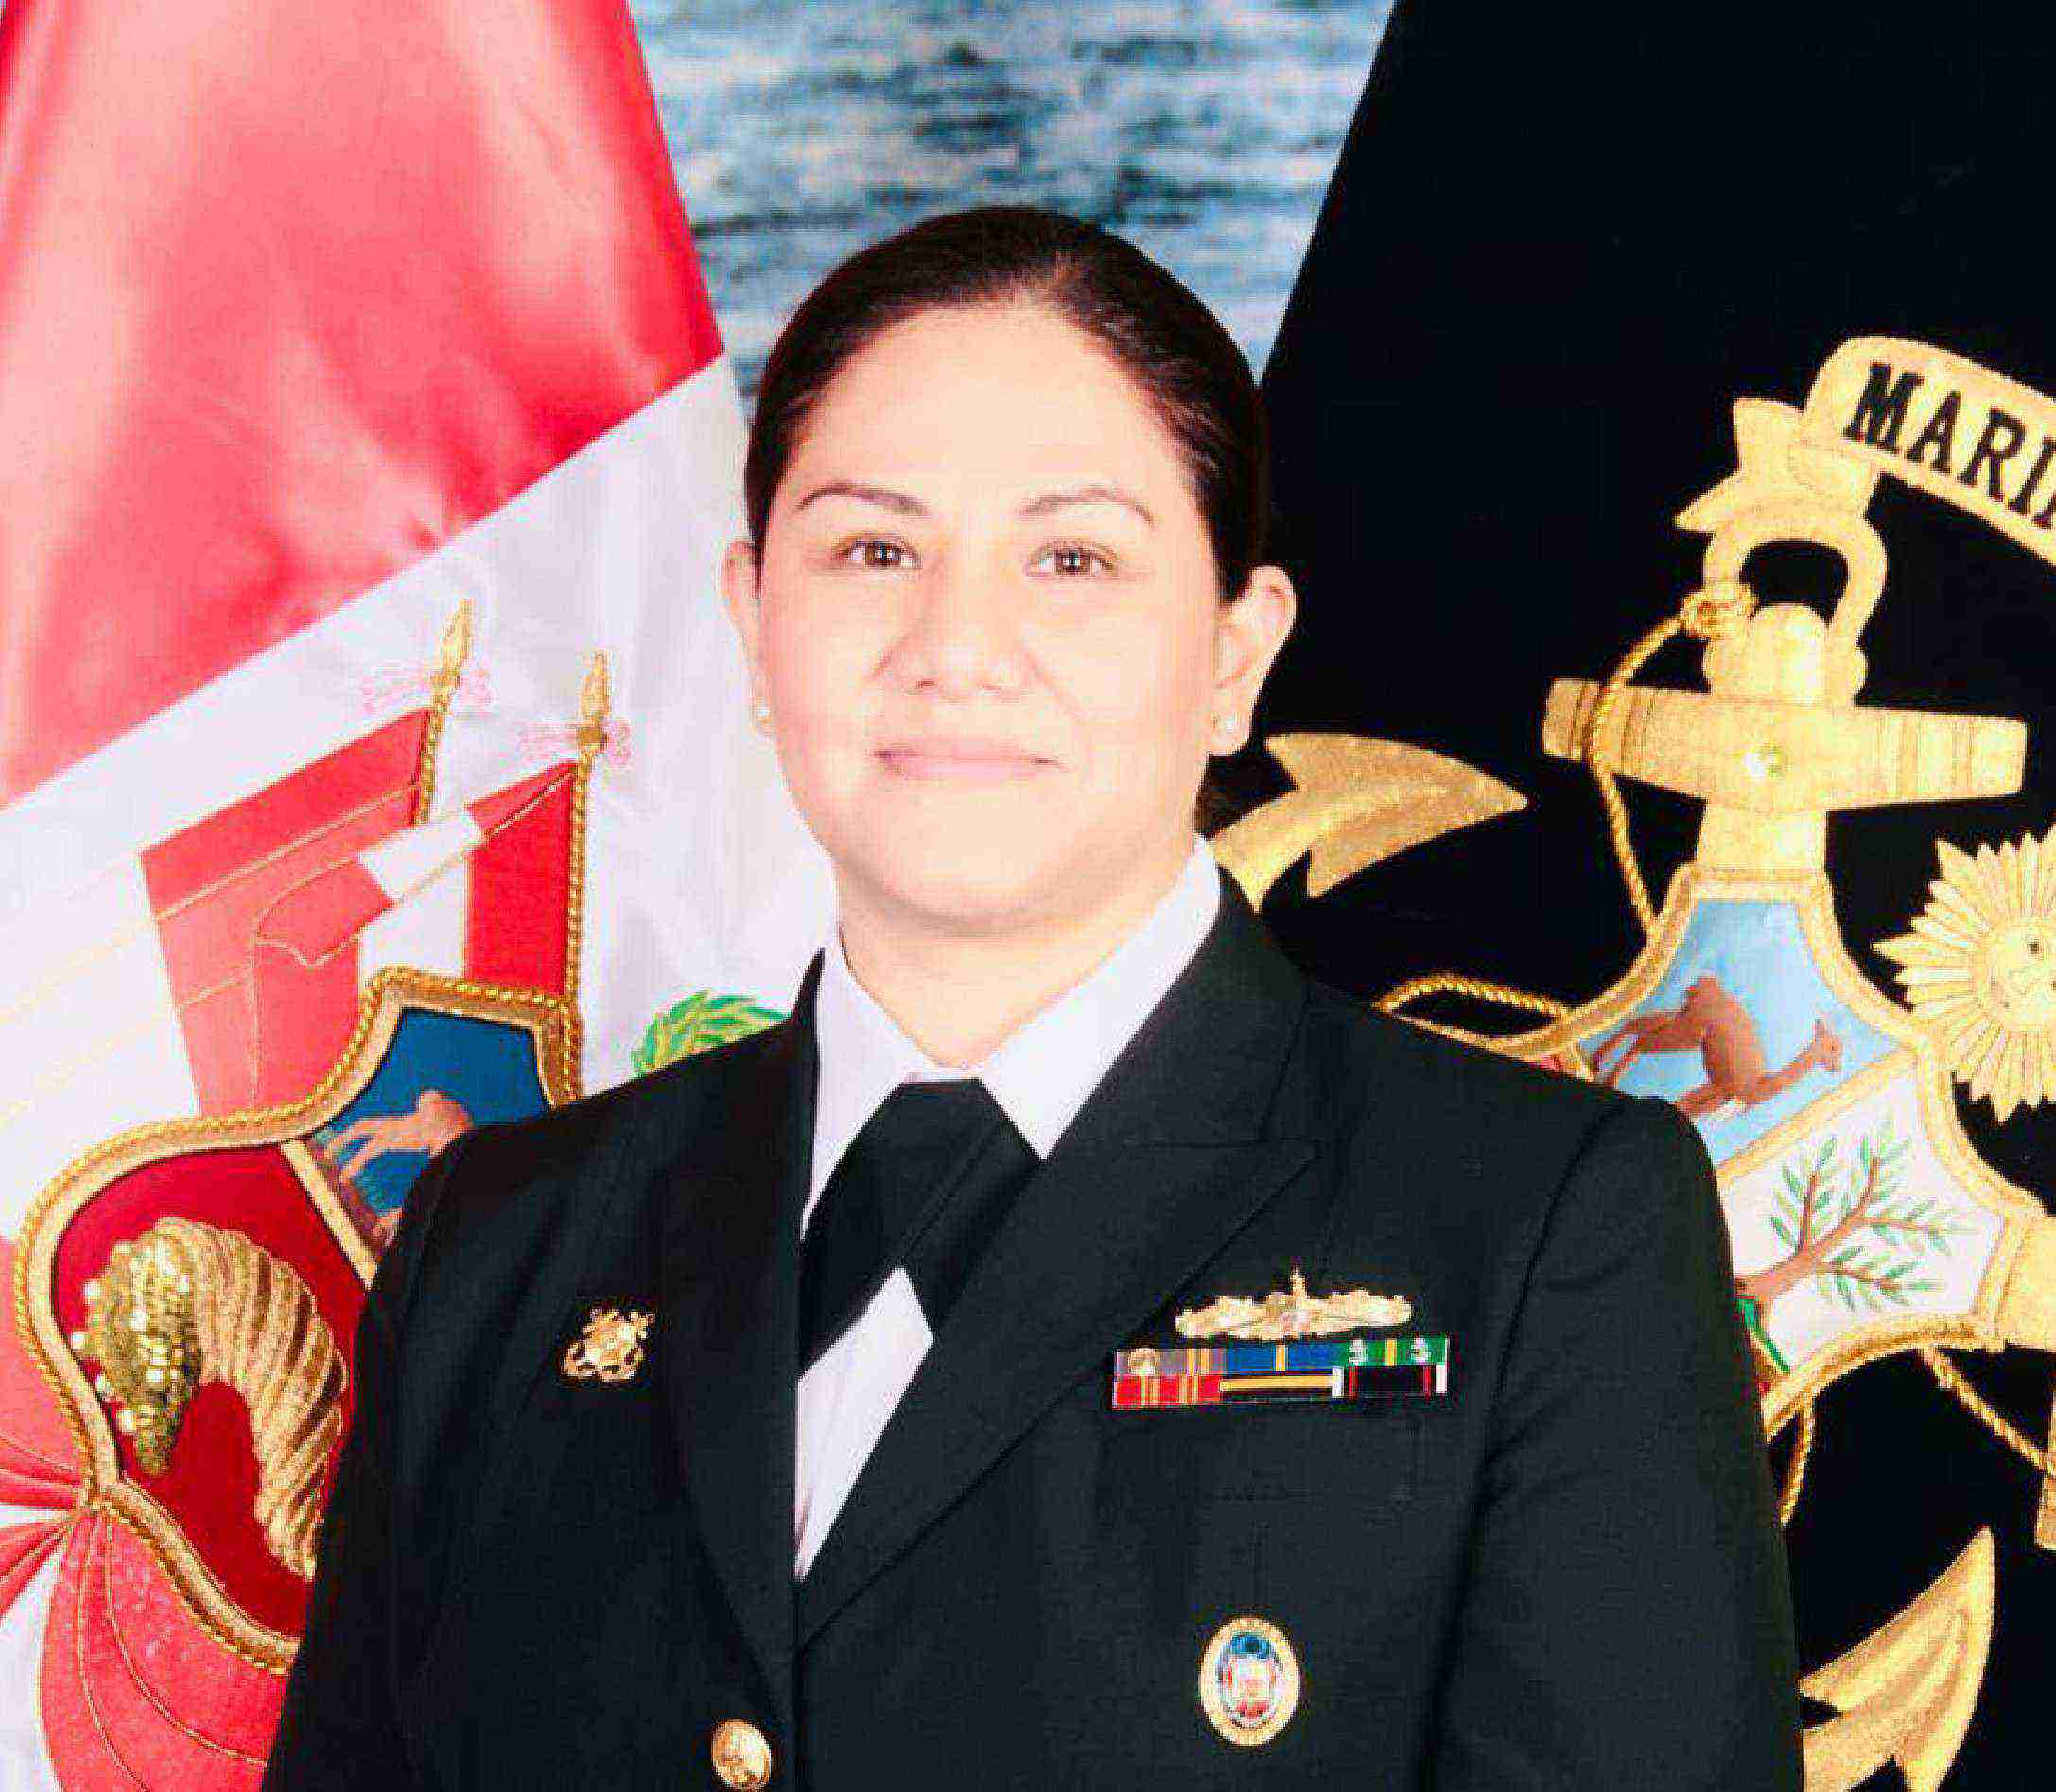 Andrea Ortiz, first female aide-de-camp of Congress: “PERUMIN really gives importance to protocol and detail in the organization”